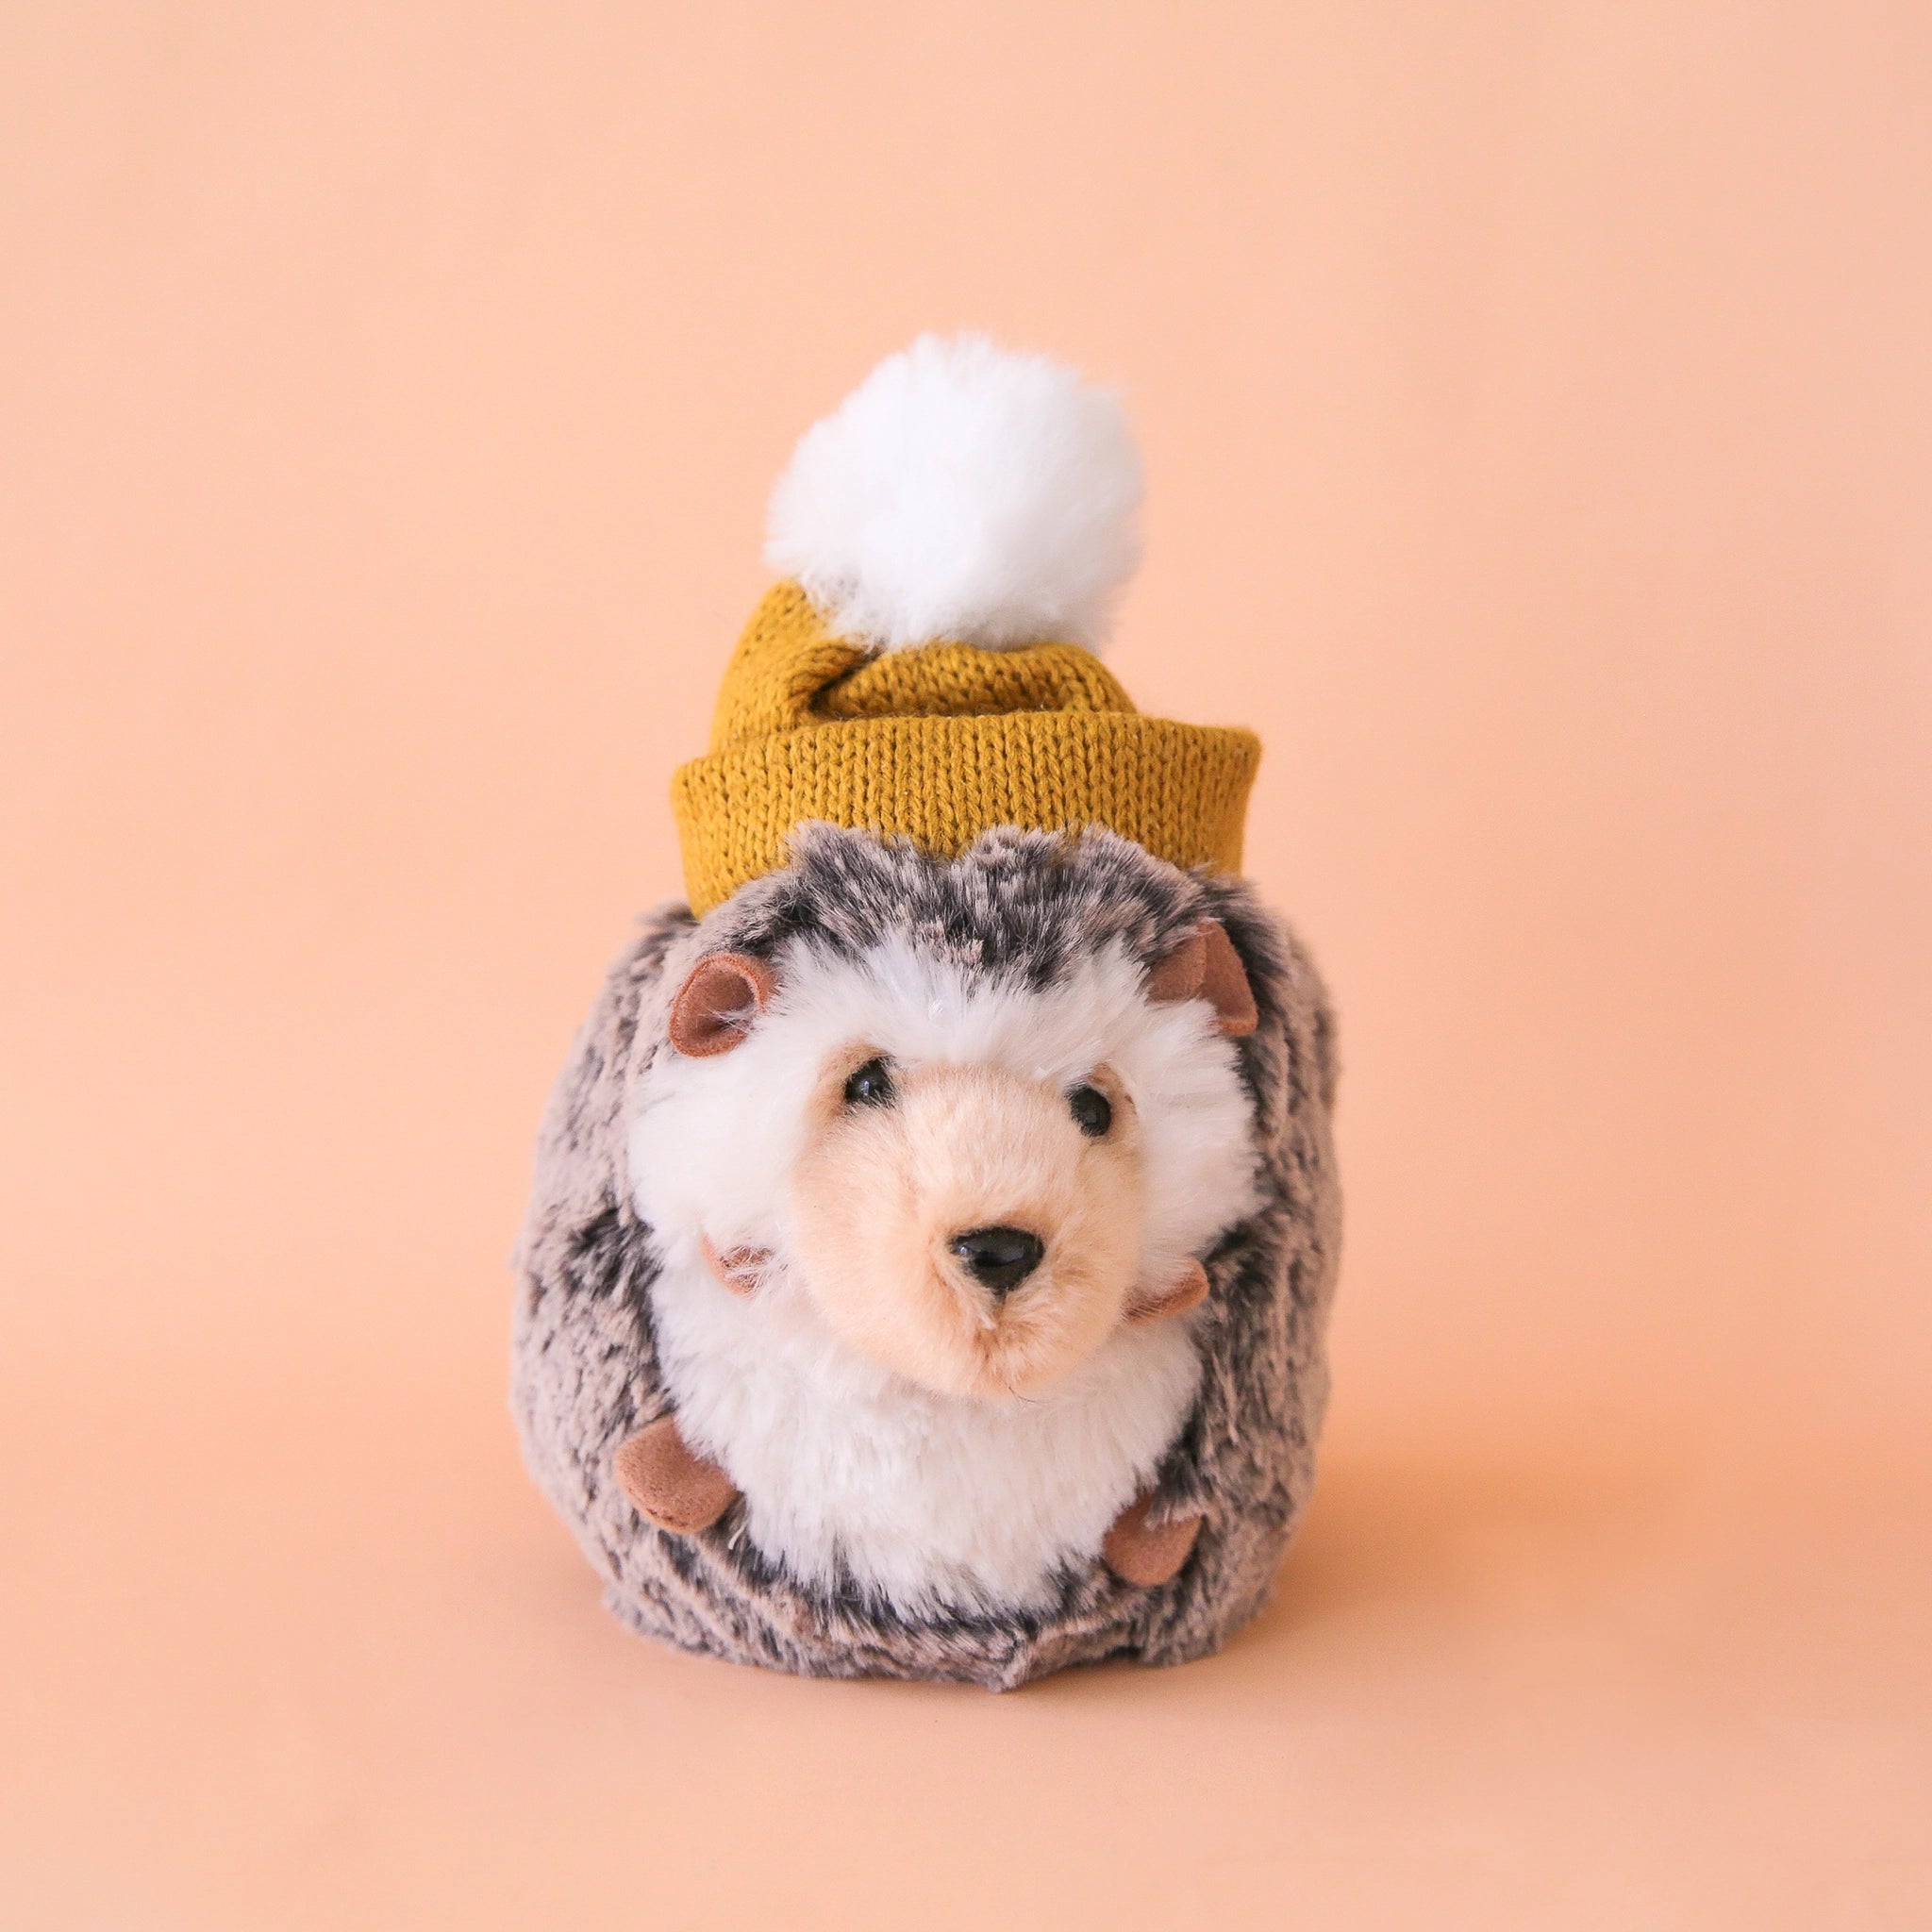 On a peachy background is a grey and white hedgehog stuffed animal with a mustard yellow knit beanie on its head with a white pom pom.